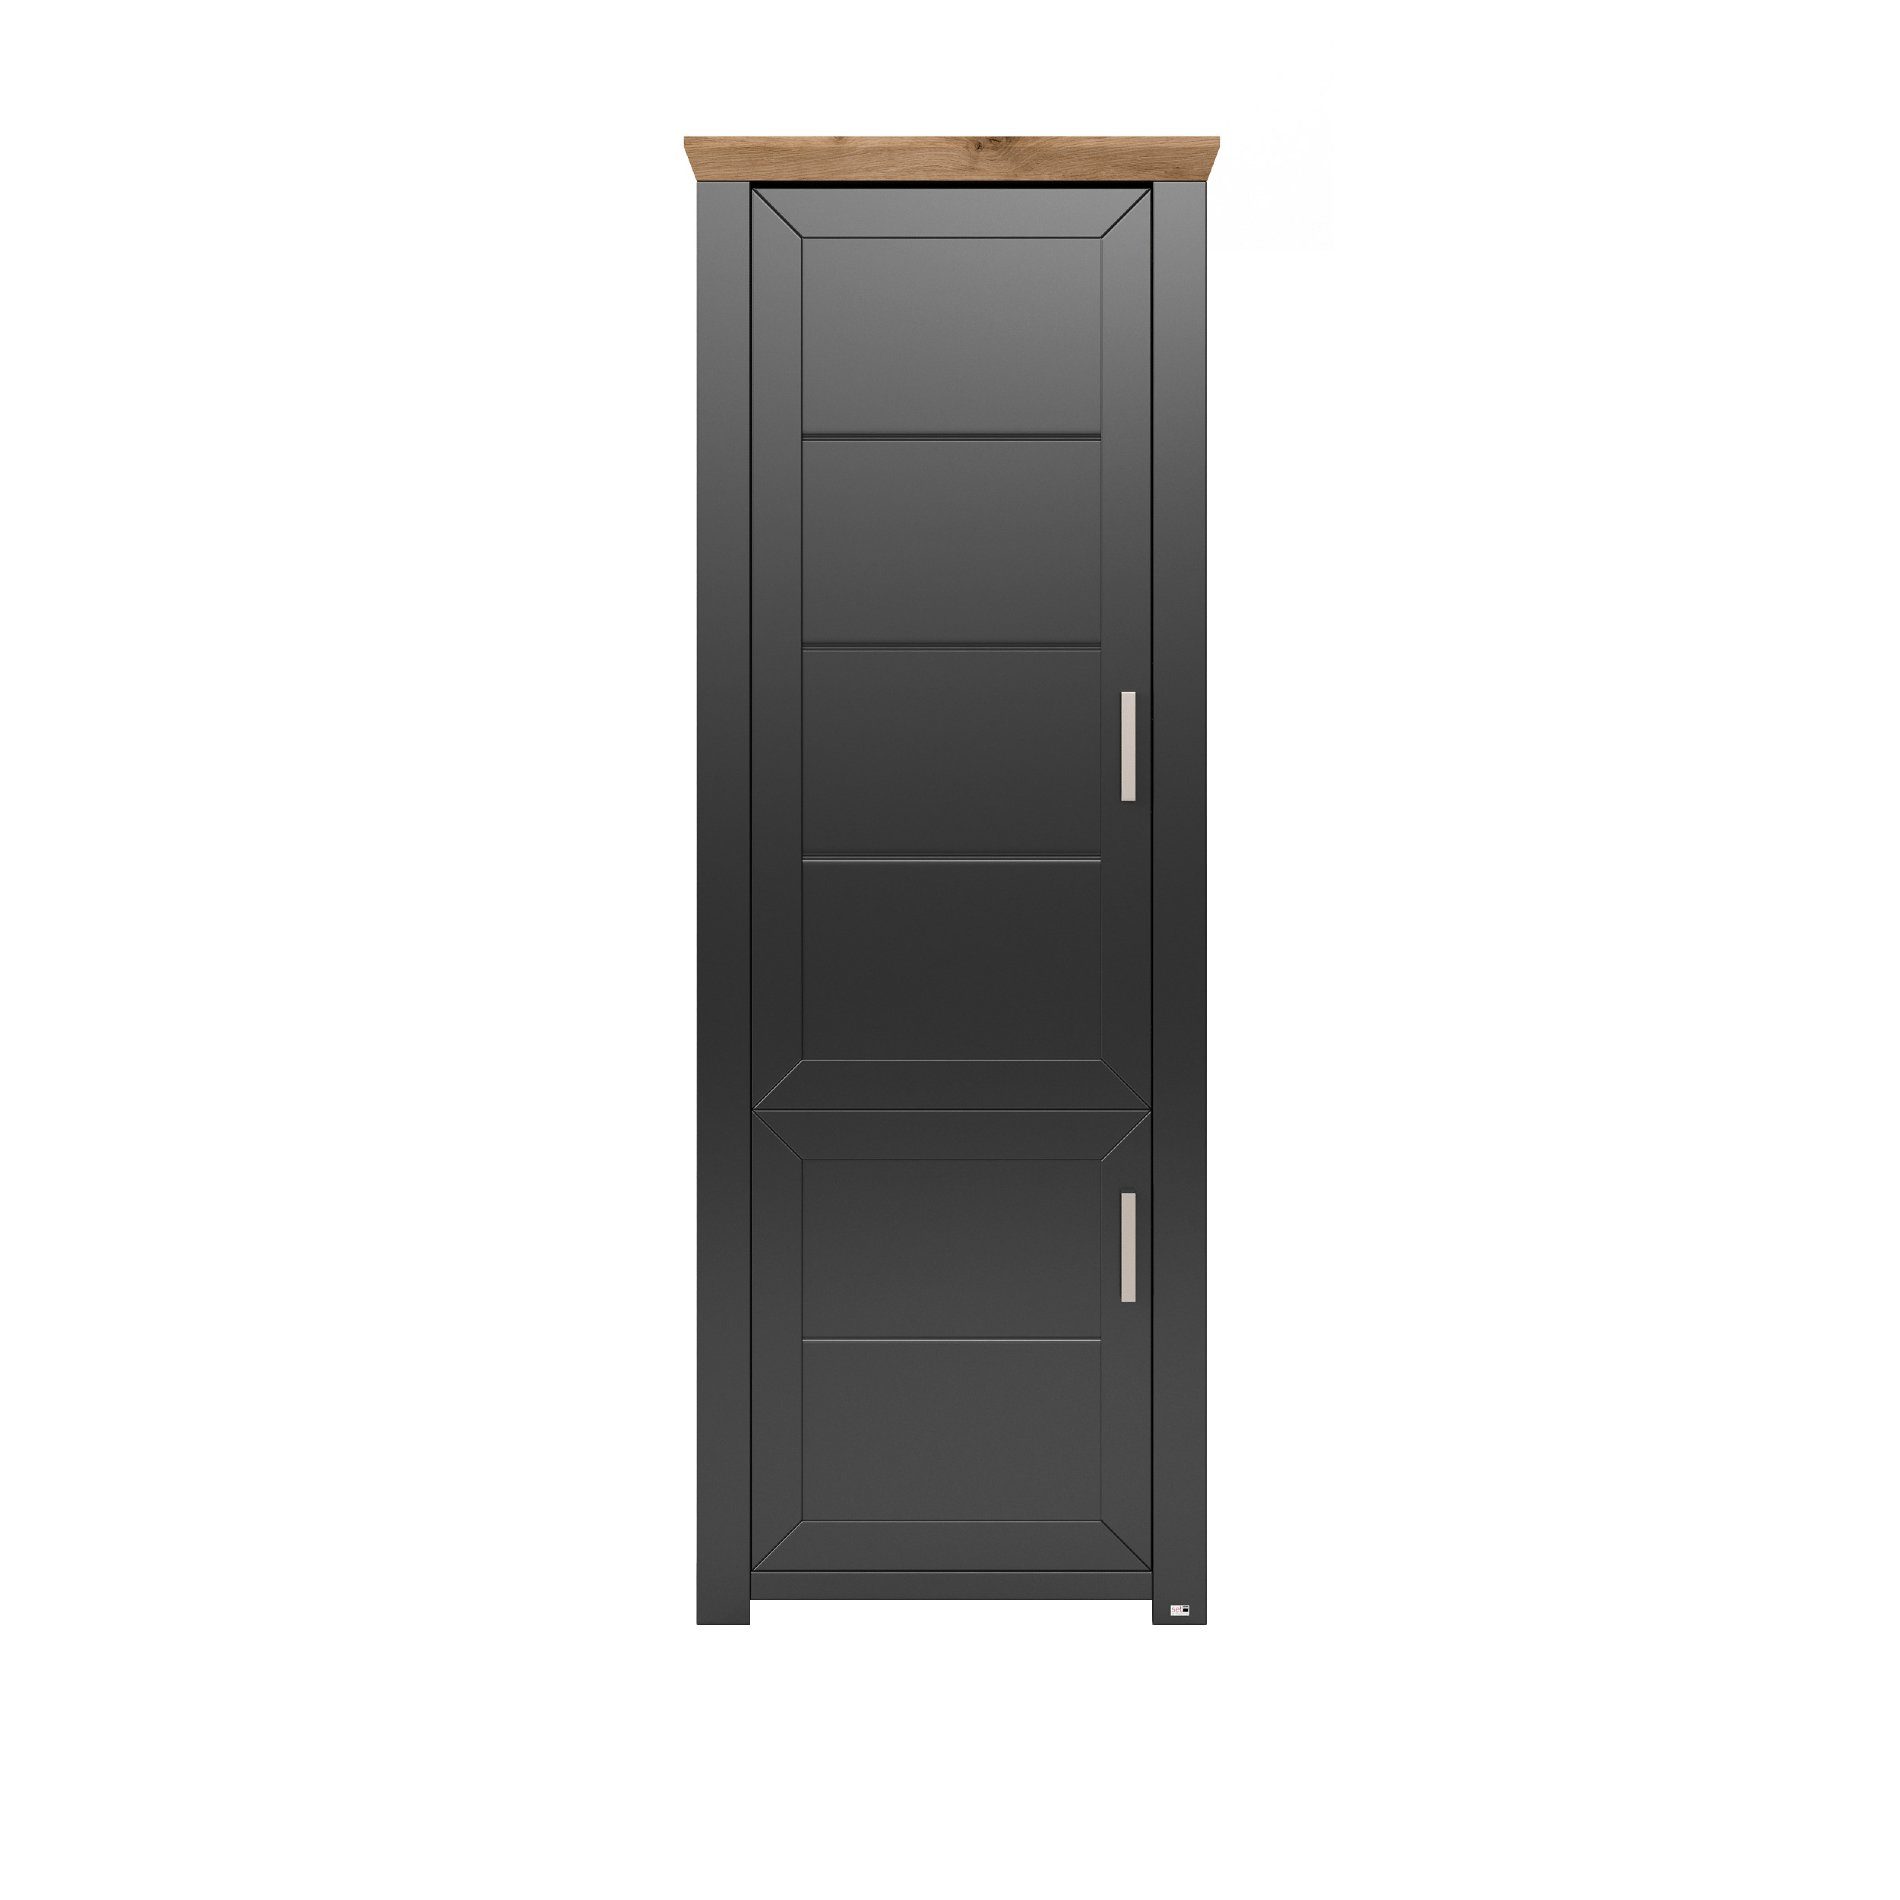 one Type York by Schrank Musterring set 03